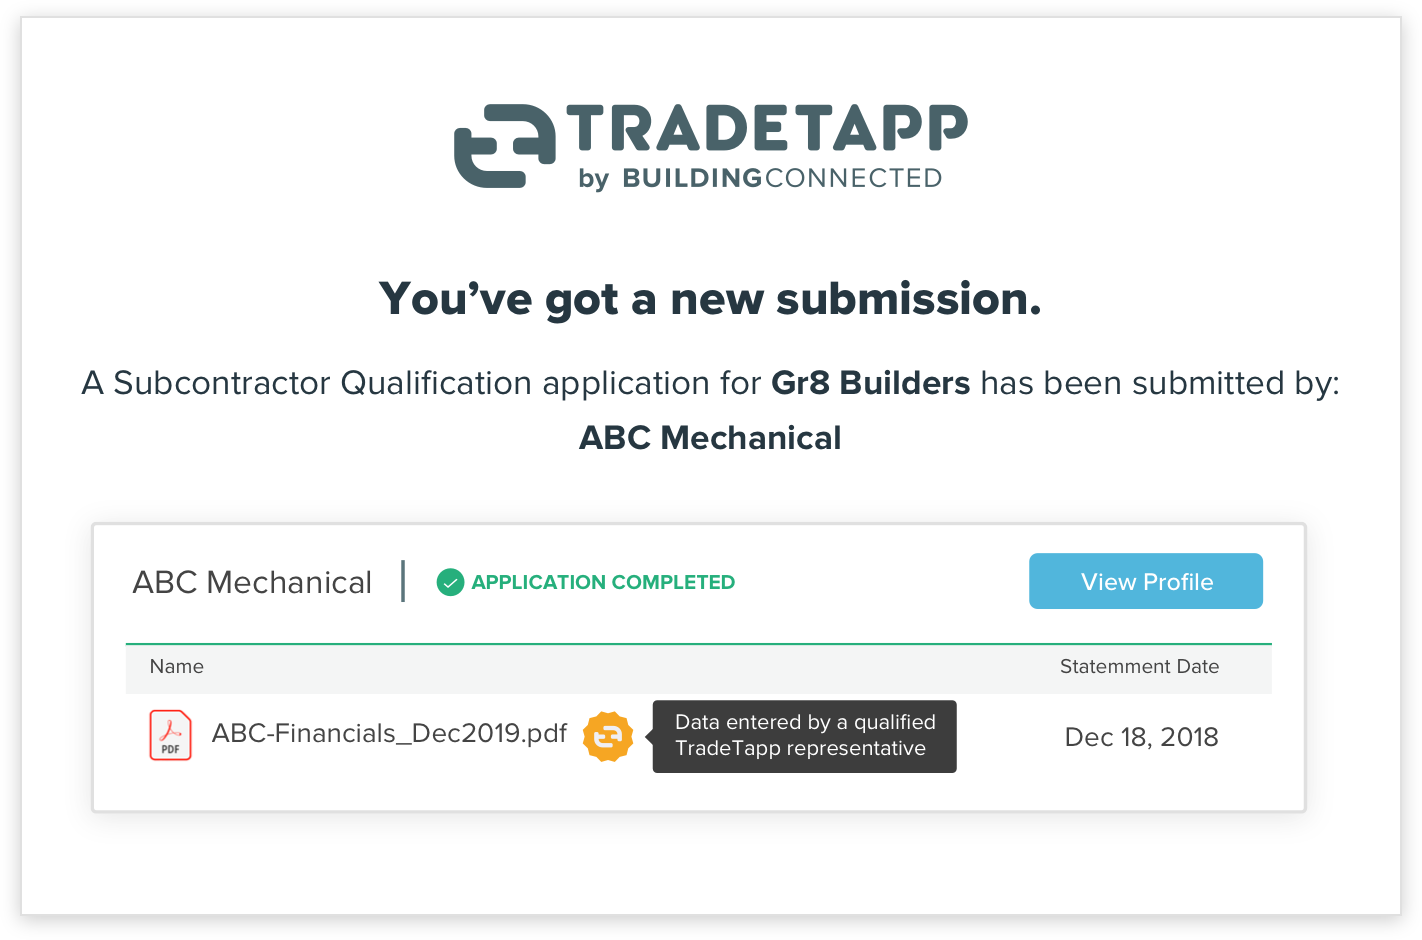 TradeTapp application submission